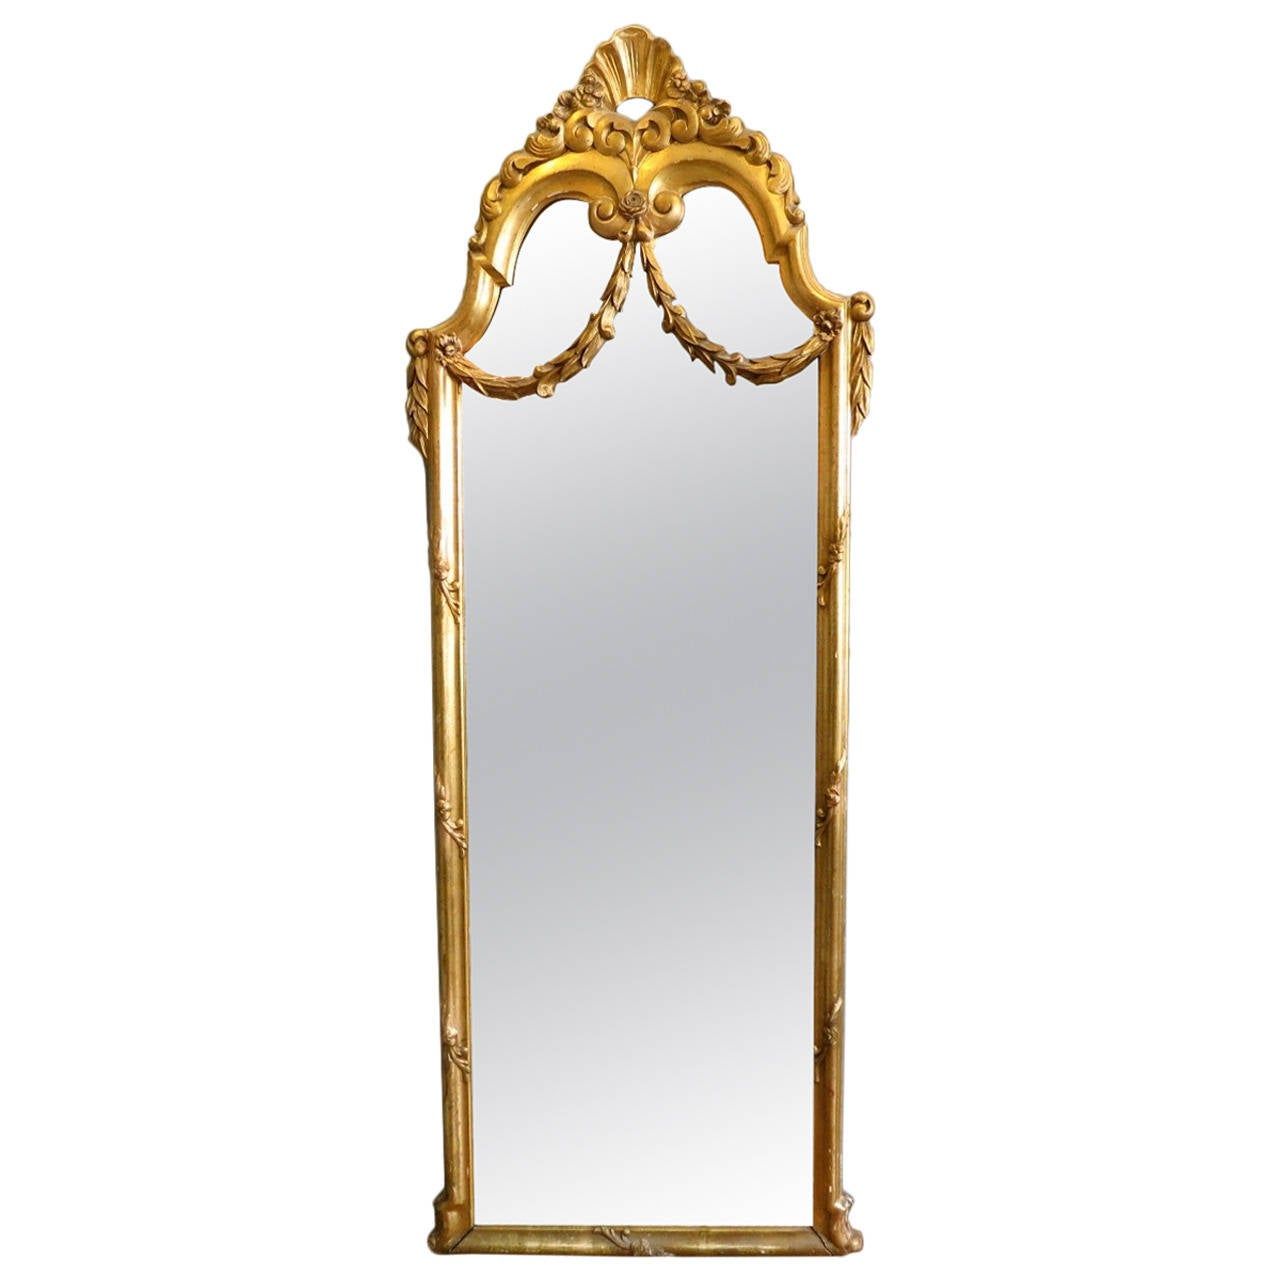 Antique French Gold Gilt Floor Standing Mirror At 1stdibs Regarding Antique Brass Standing Mirrors (View 14 of 15)